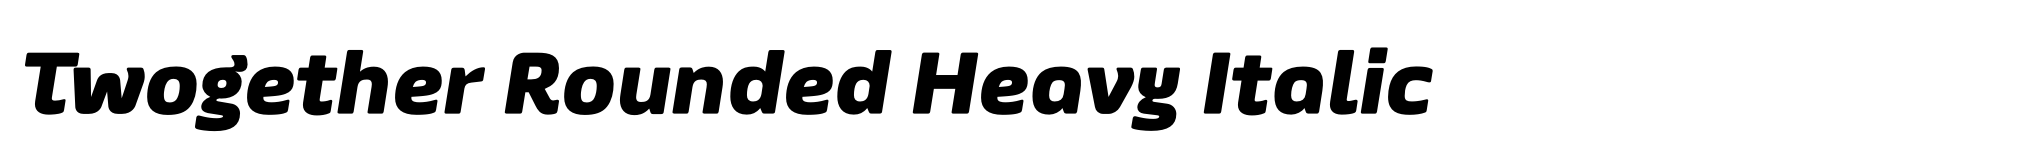 Twogether Rounded Heavy Italic image